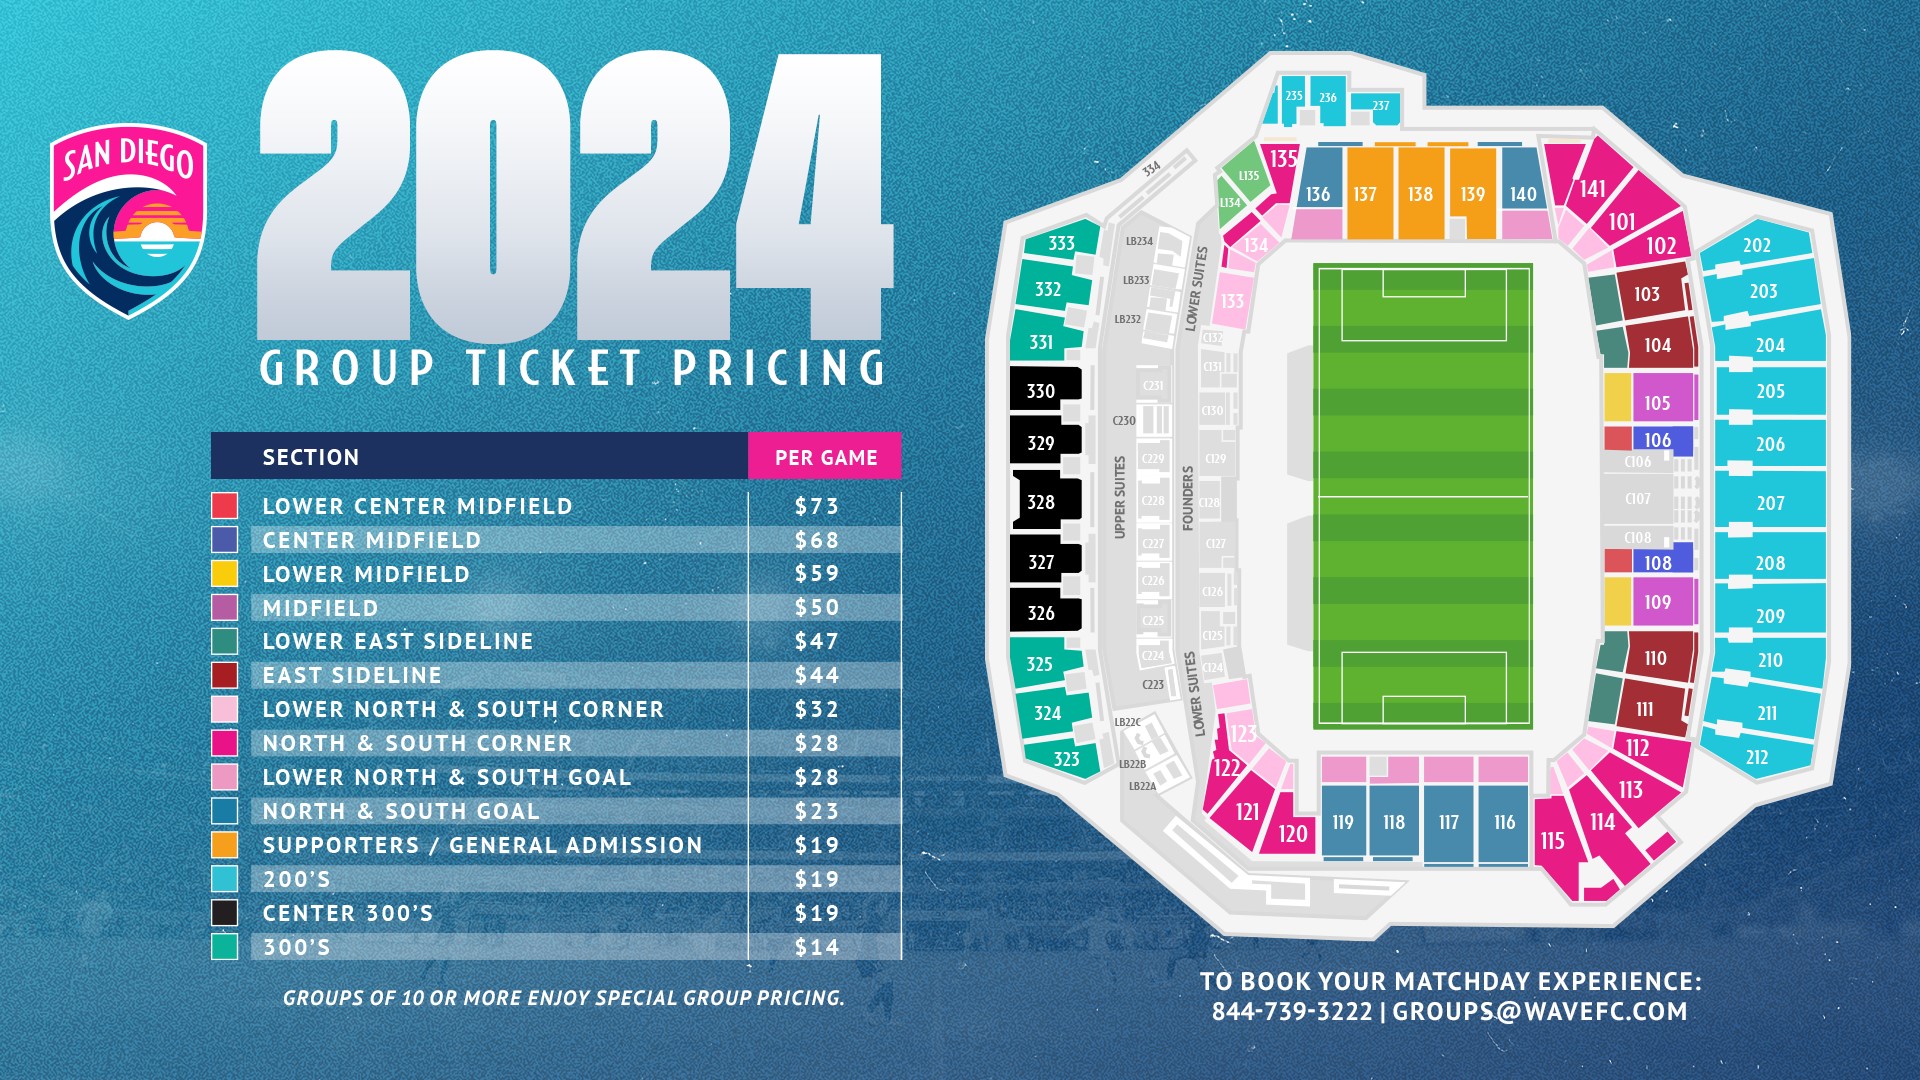 seating & pricing chart